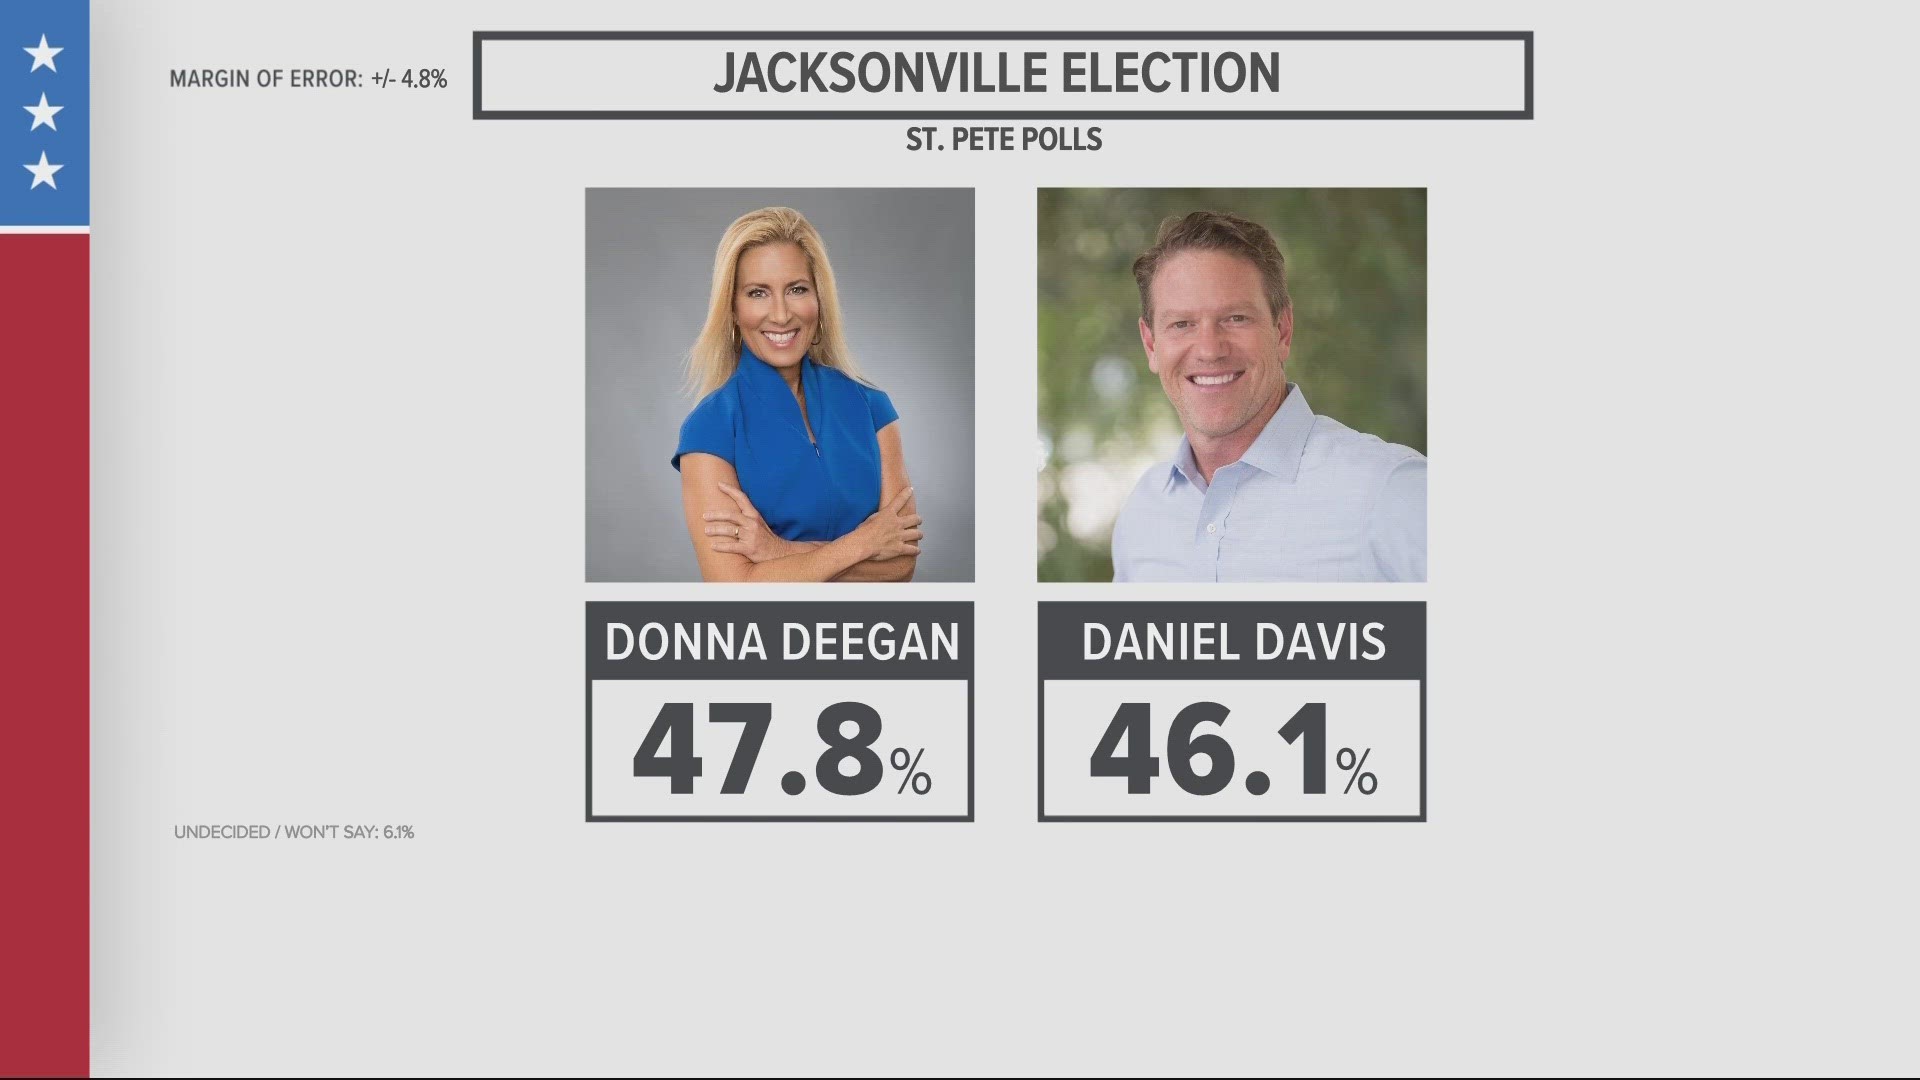 A new poll commissioned by Florida Politics, has Democrat Donna Deegan leading, but less than 2 points stand between her and Republican Daniel Davis.